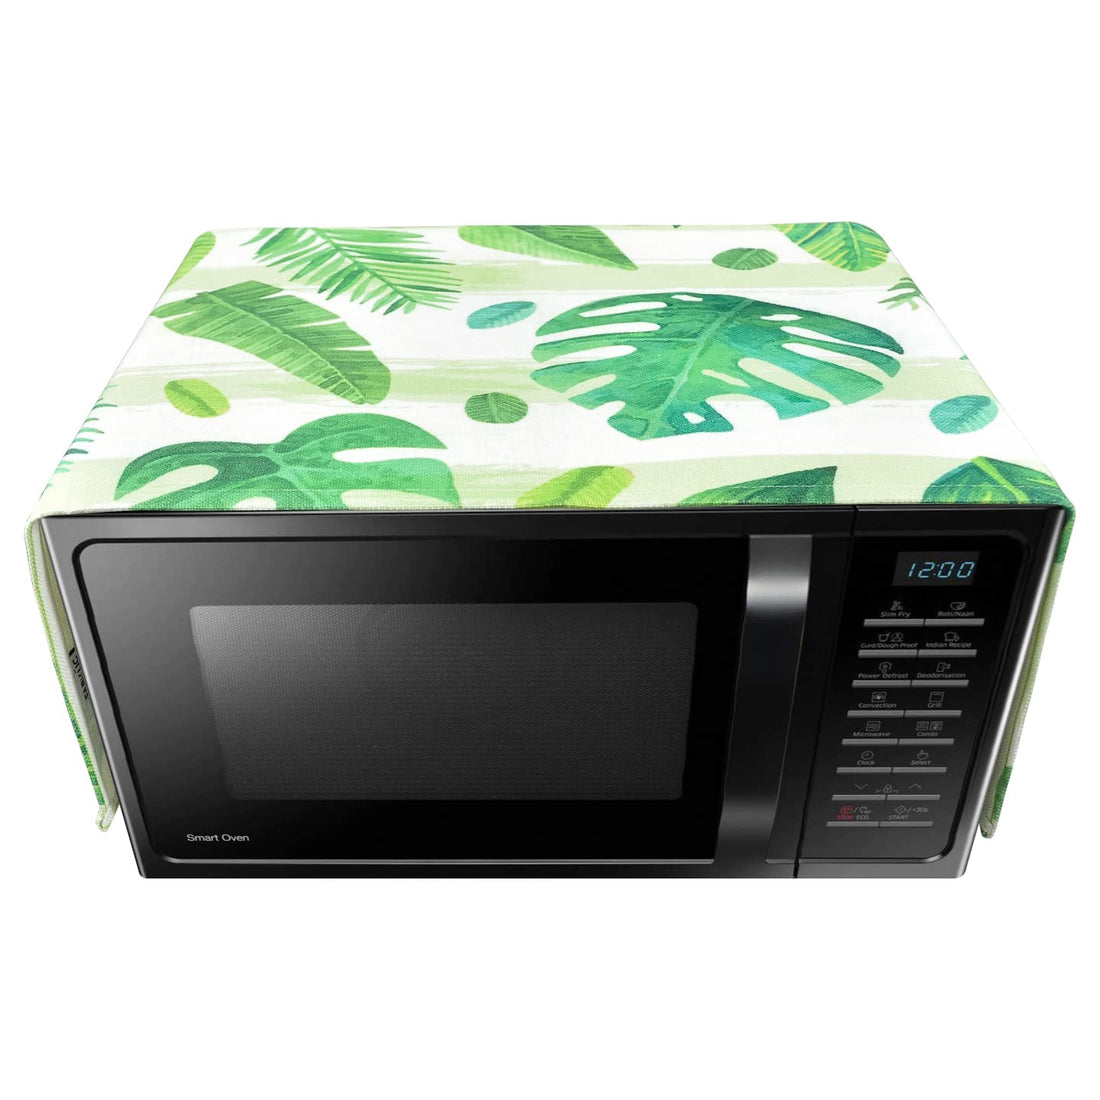 FABKUC Microwave/Oven Top Cotton Cover with 2 Utility Pockets, Splash-Proof, Dustproof Washer Dryer Cover (Green Cover)